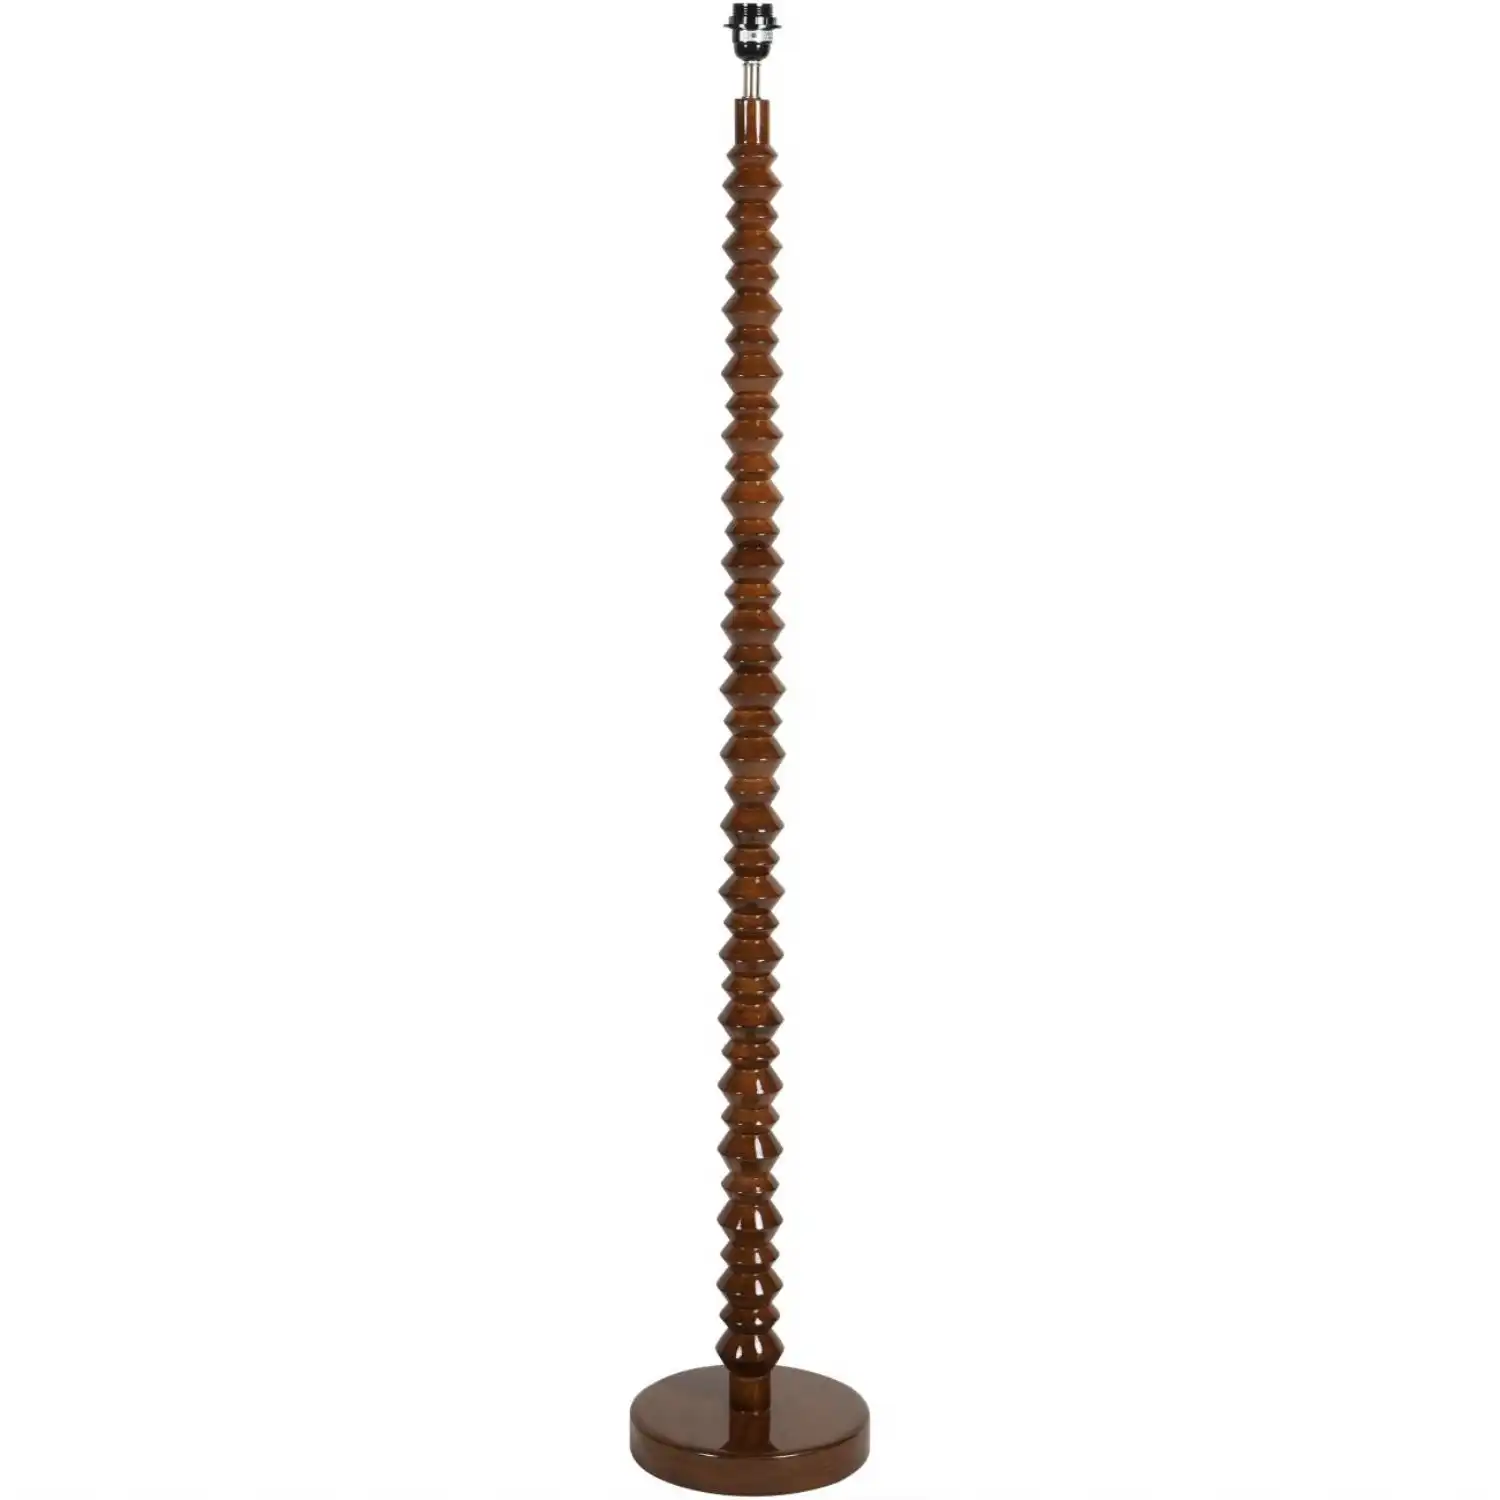 Lacquer Floor Maple Lamp Base